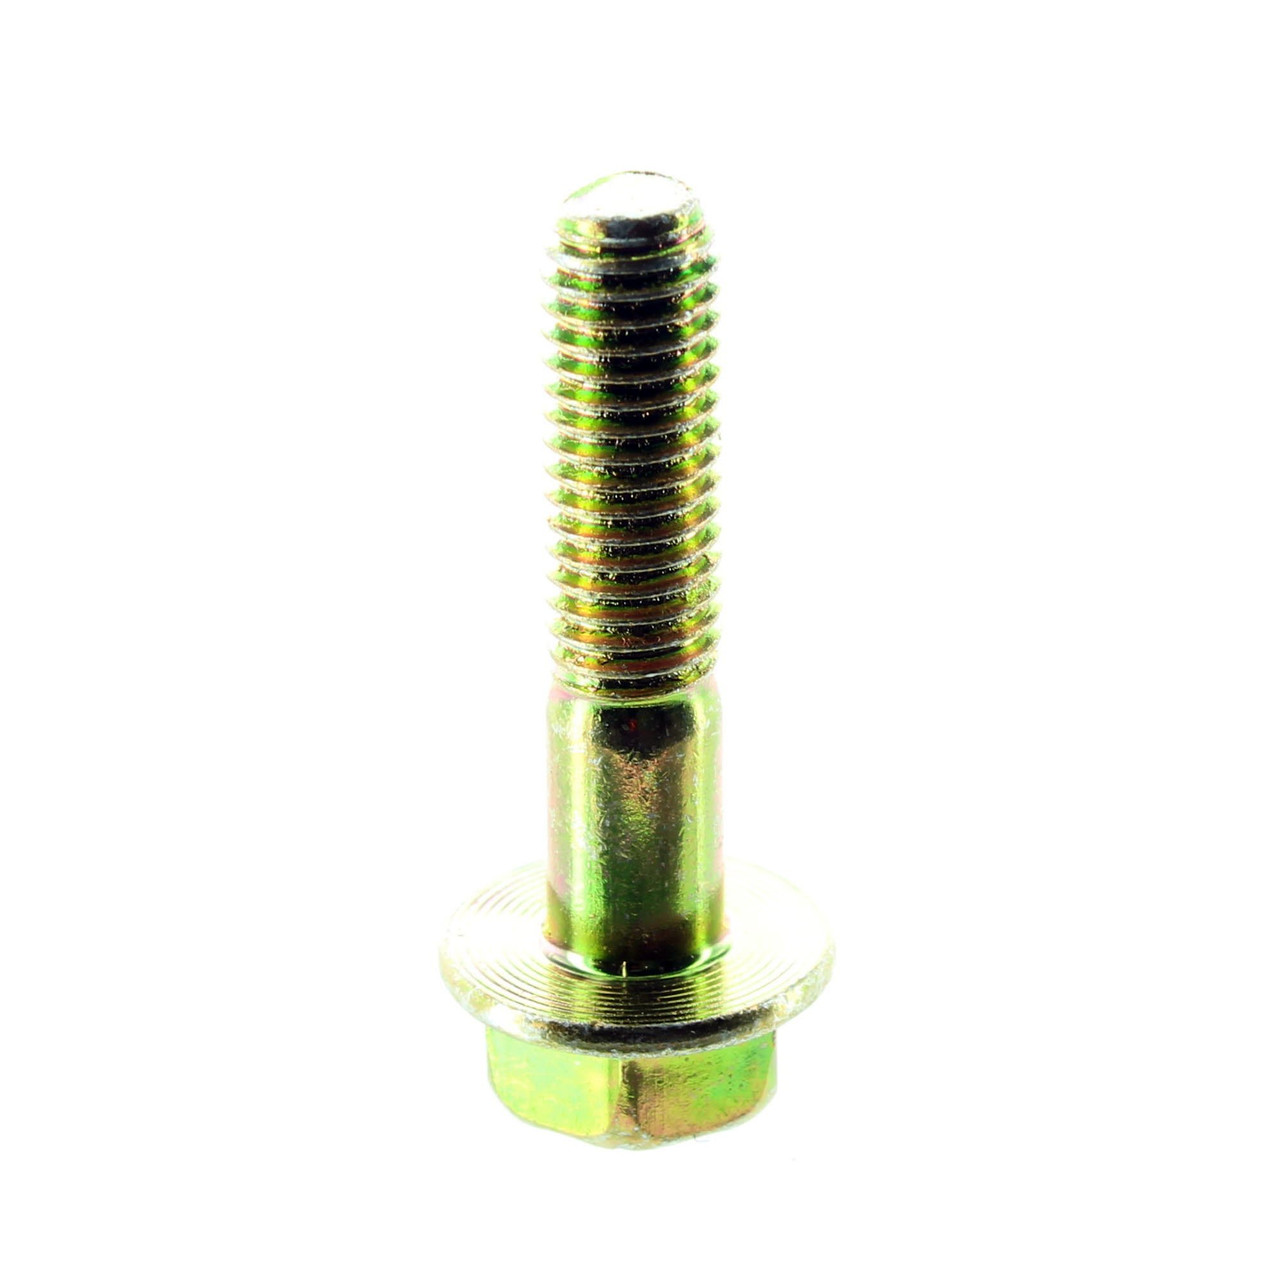 Can-Am New OEM Hex Flanged Screw (M8 X 35), 207683544